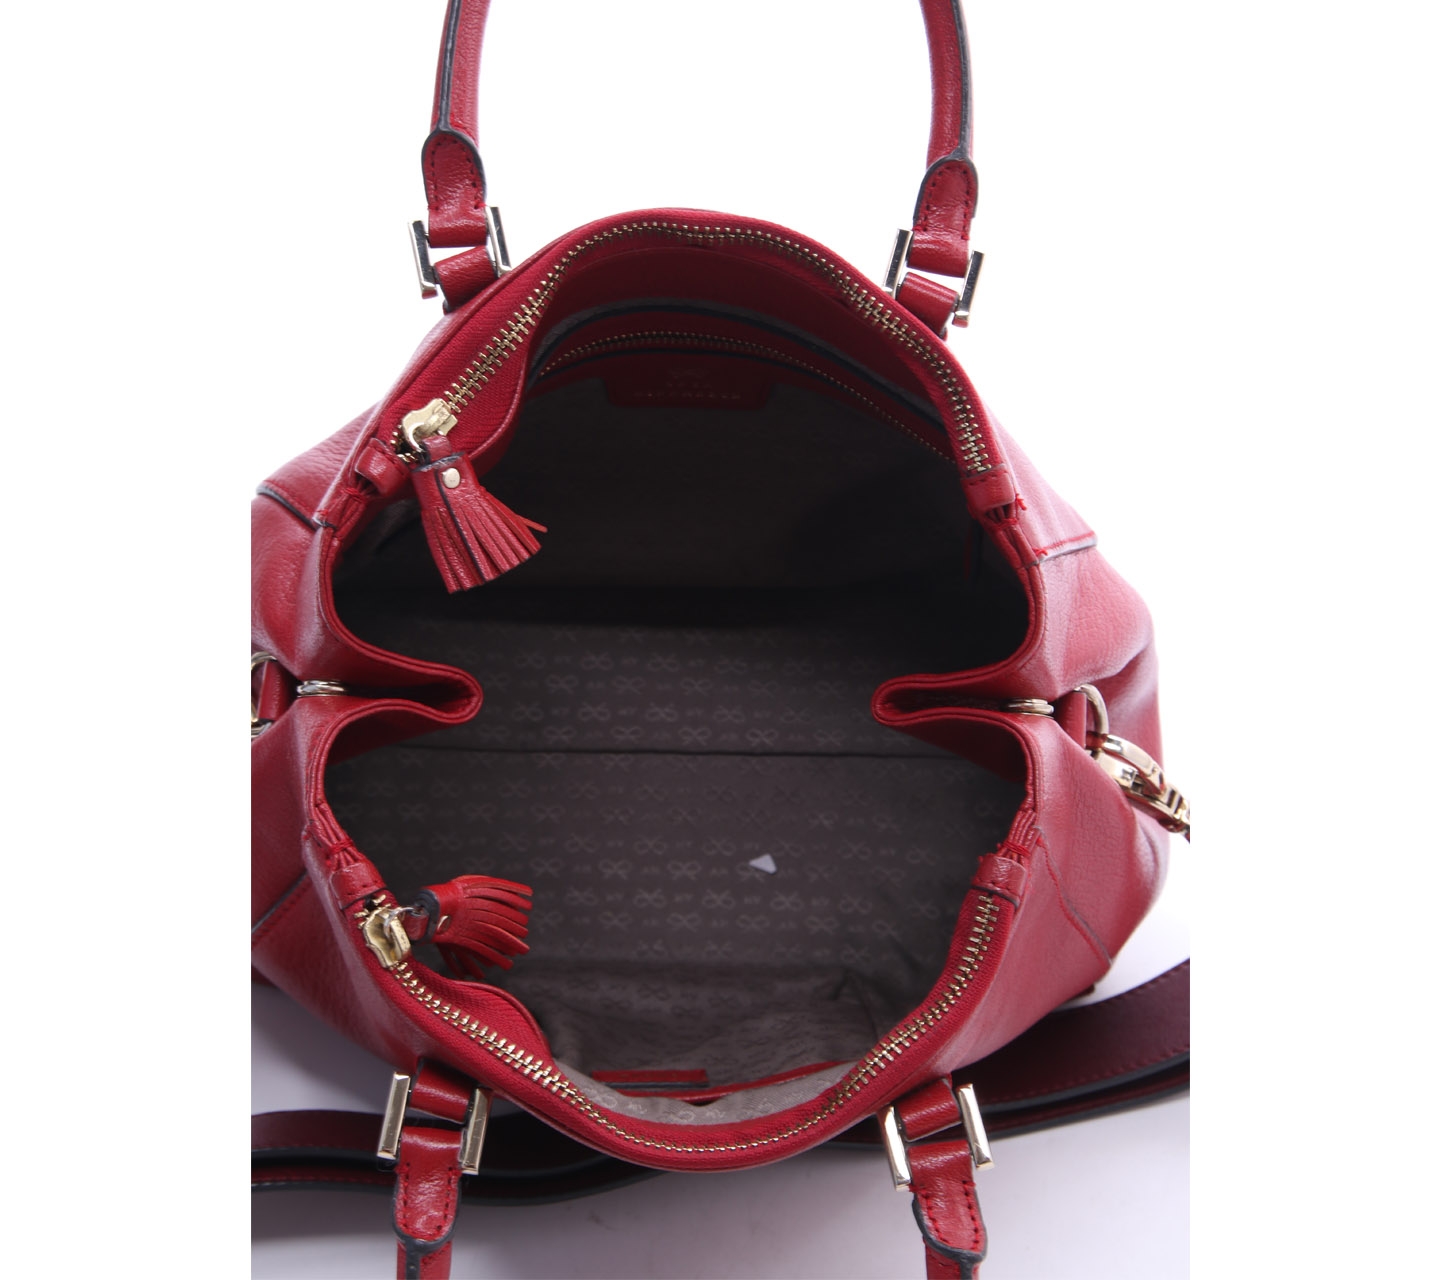 Anya Hindmarch Red Leather Double Zipper Satchel